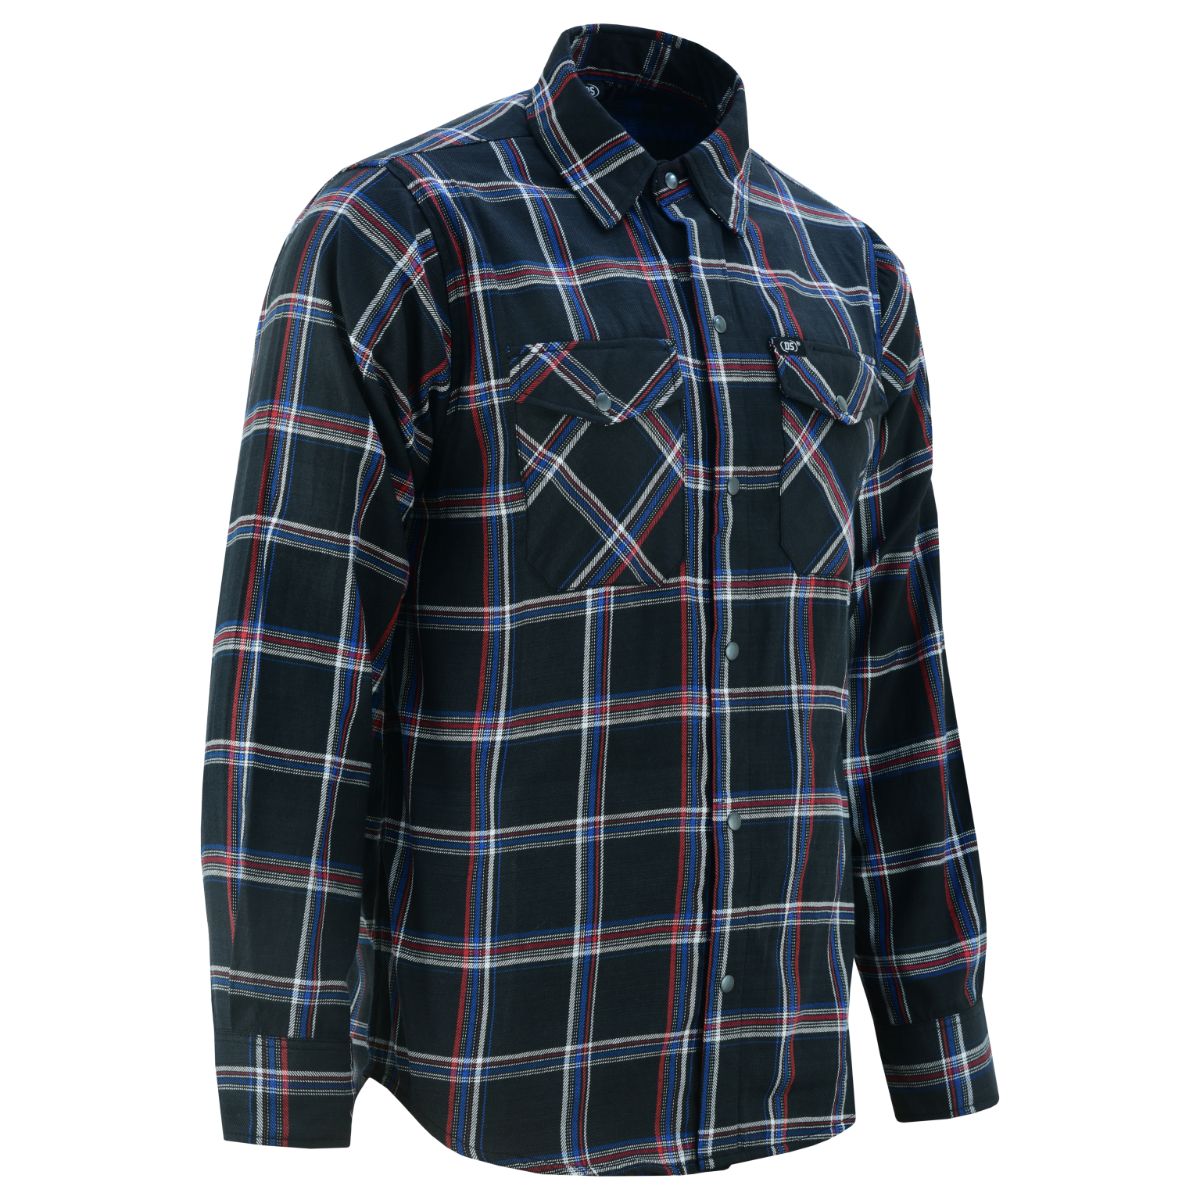 Flannel Shirt - Black, Red and Blue